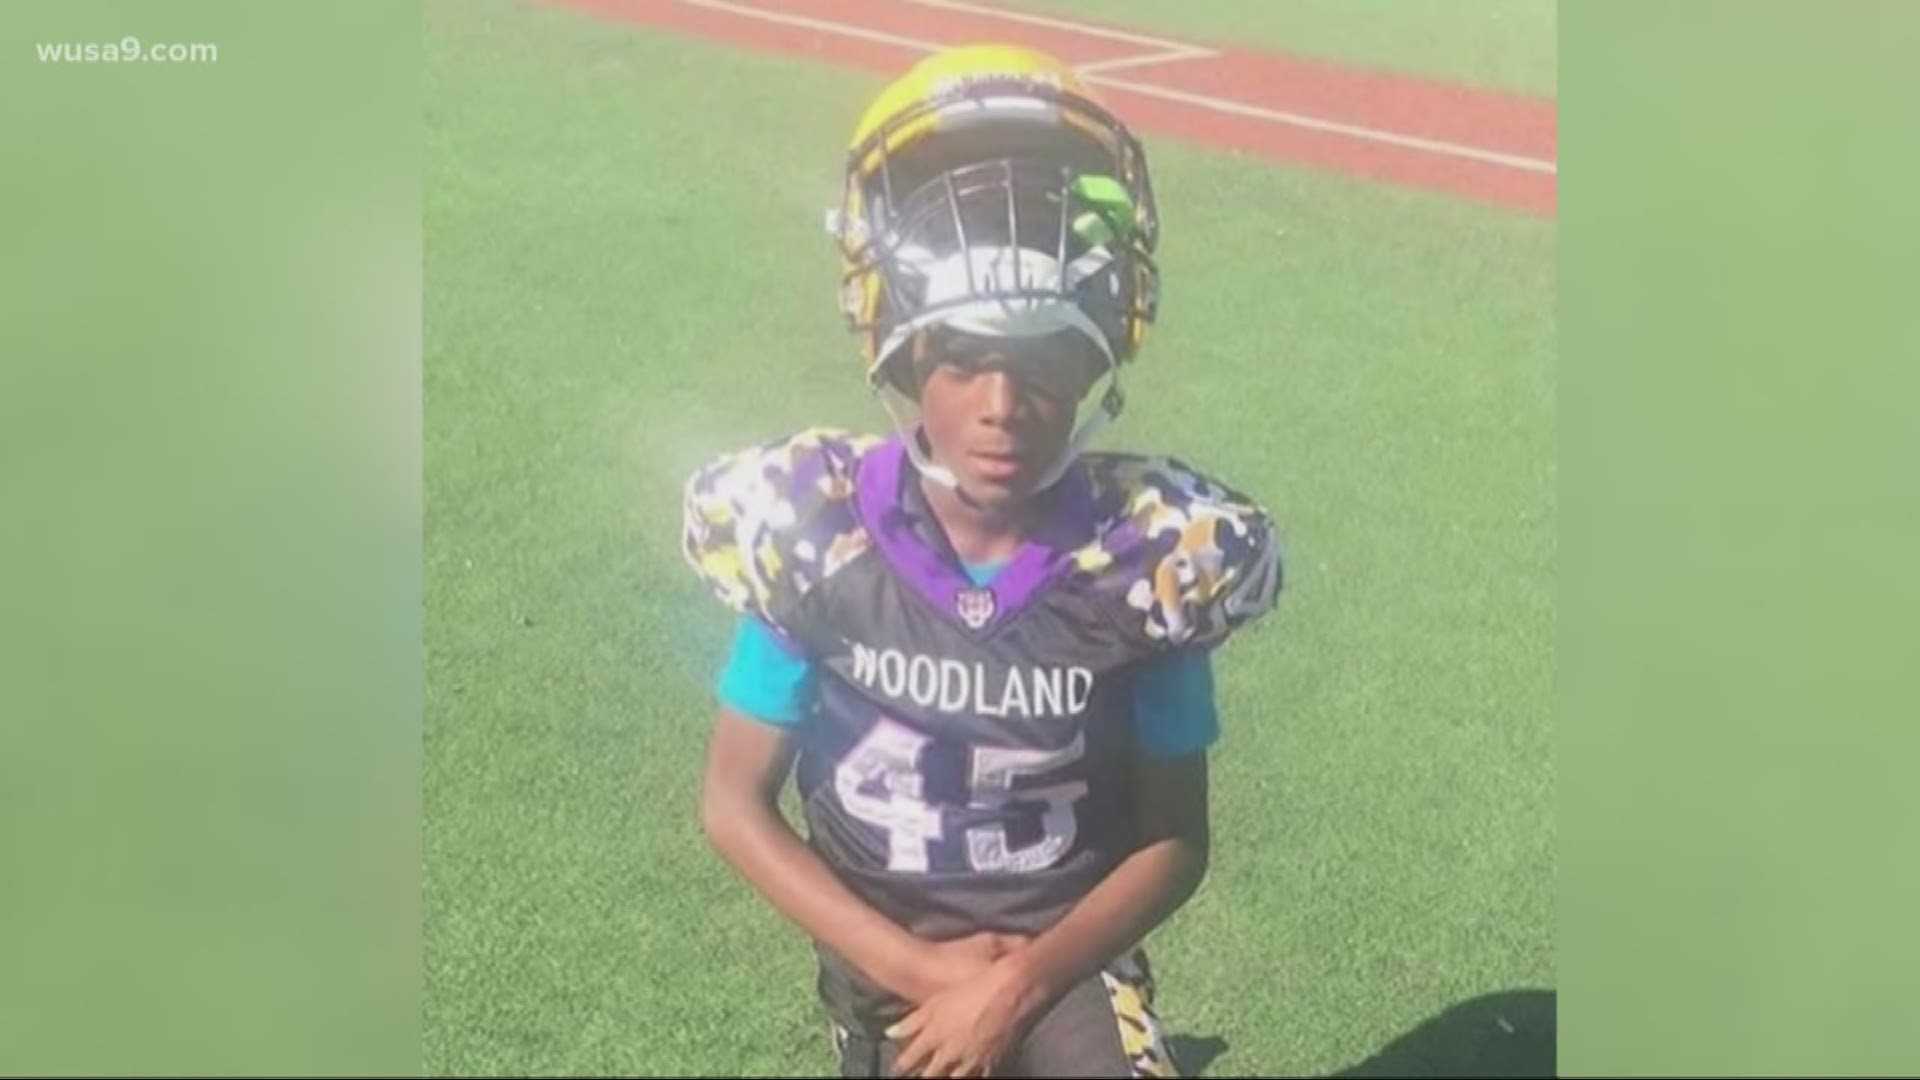 He was only 11 years old and last night he became the 88th person shot and killed in the District this year. 
Police say Karon Brown was targeted by his killer.